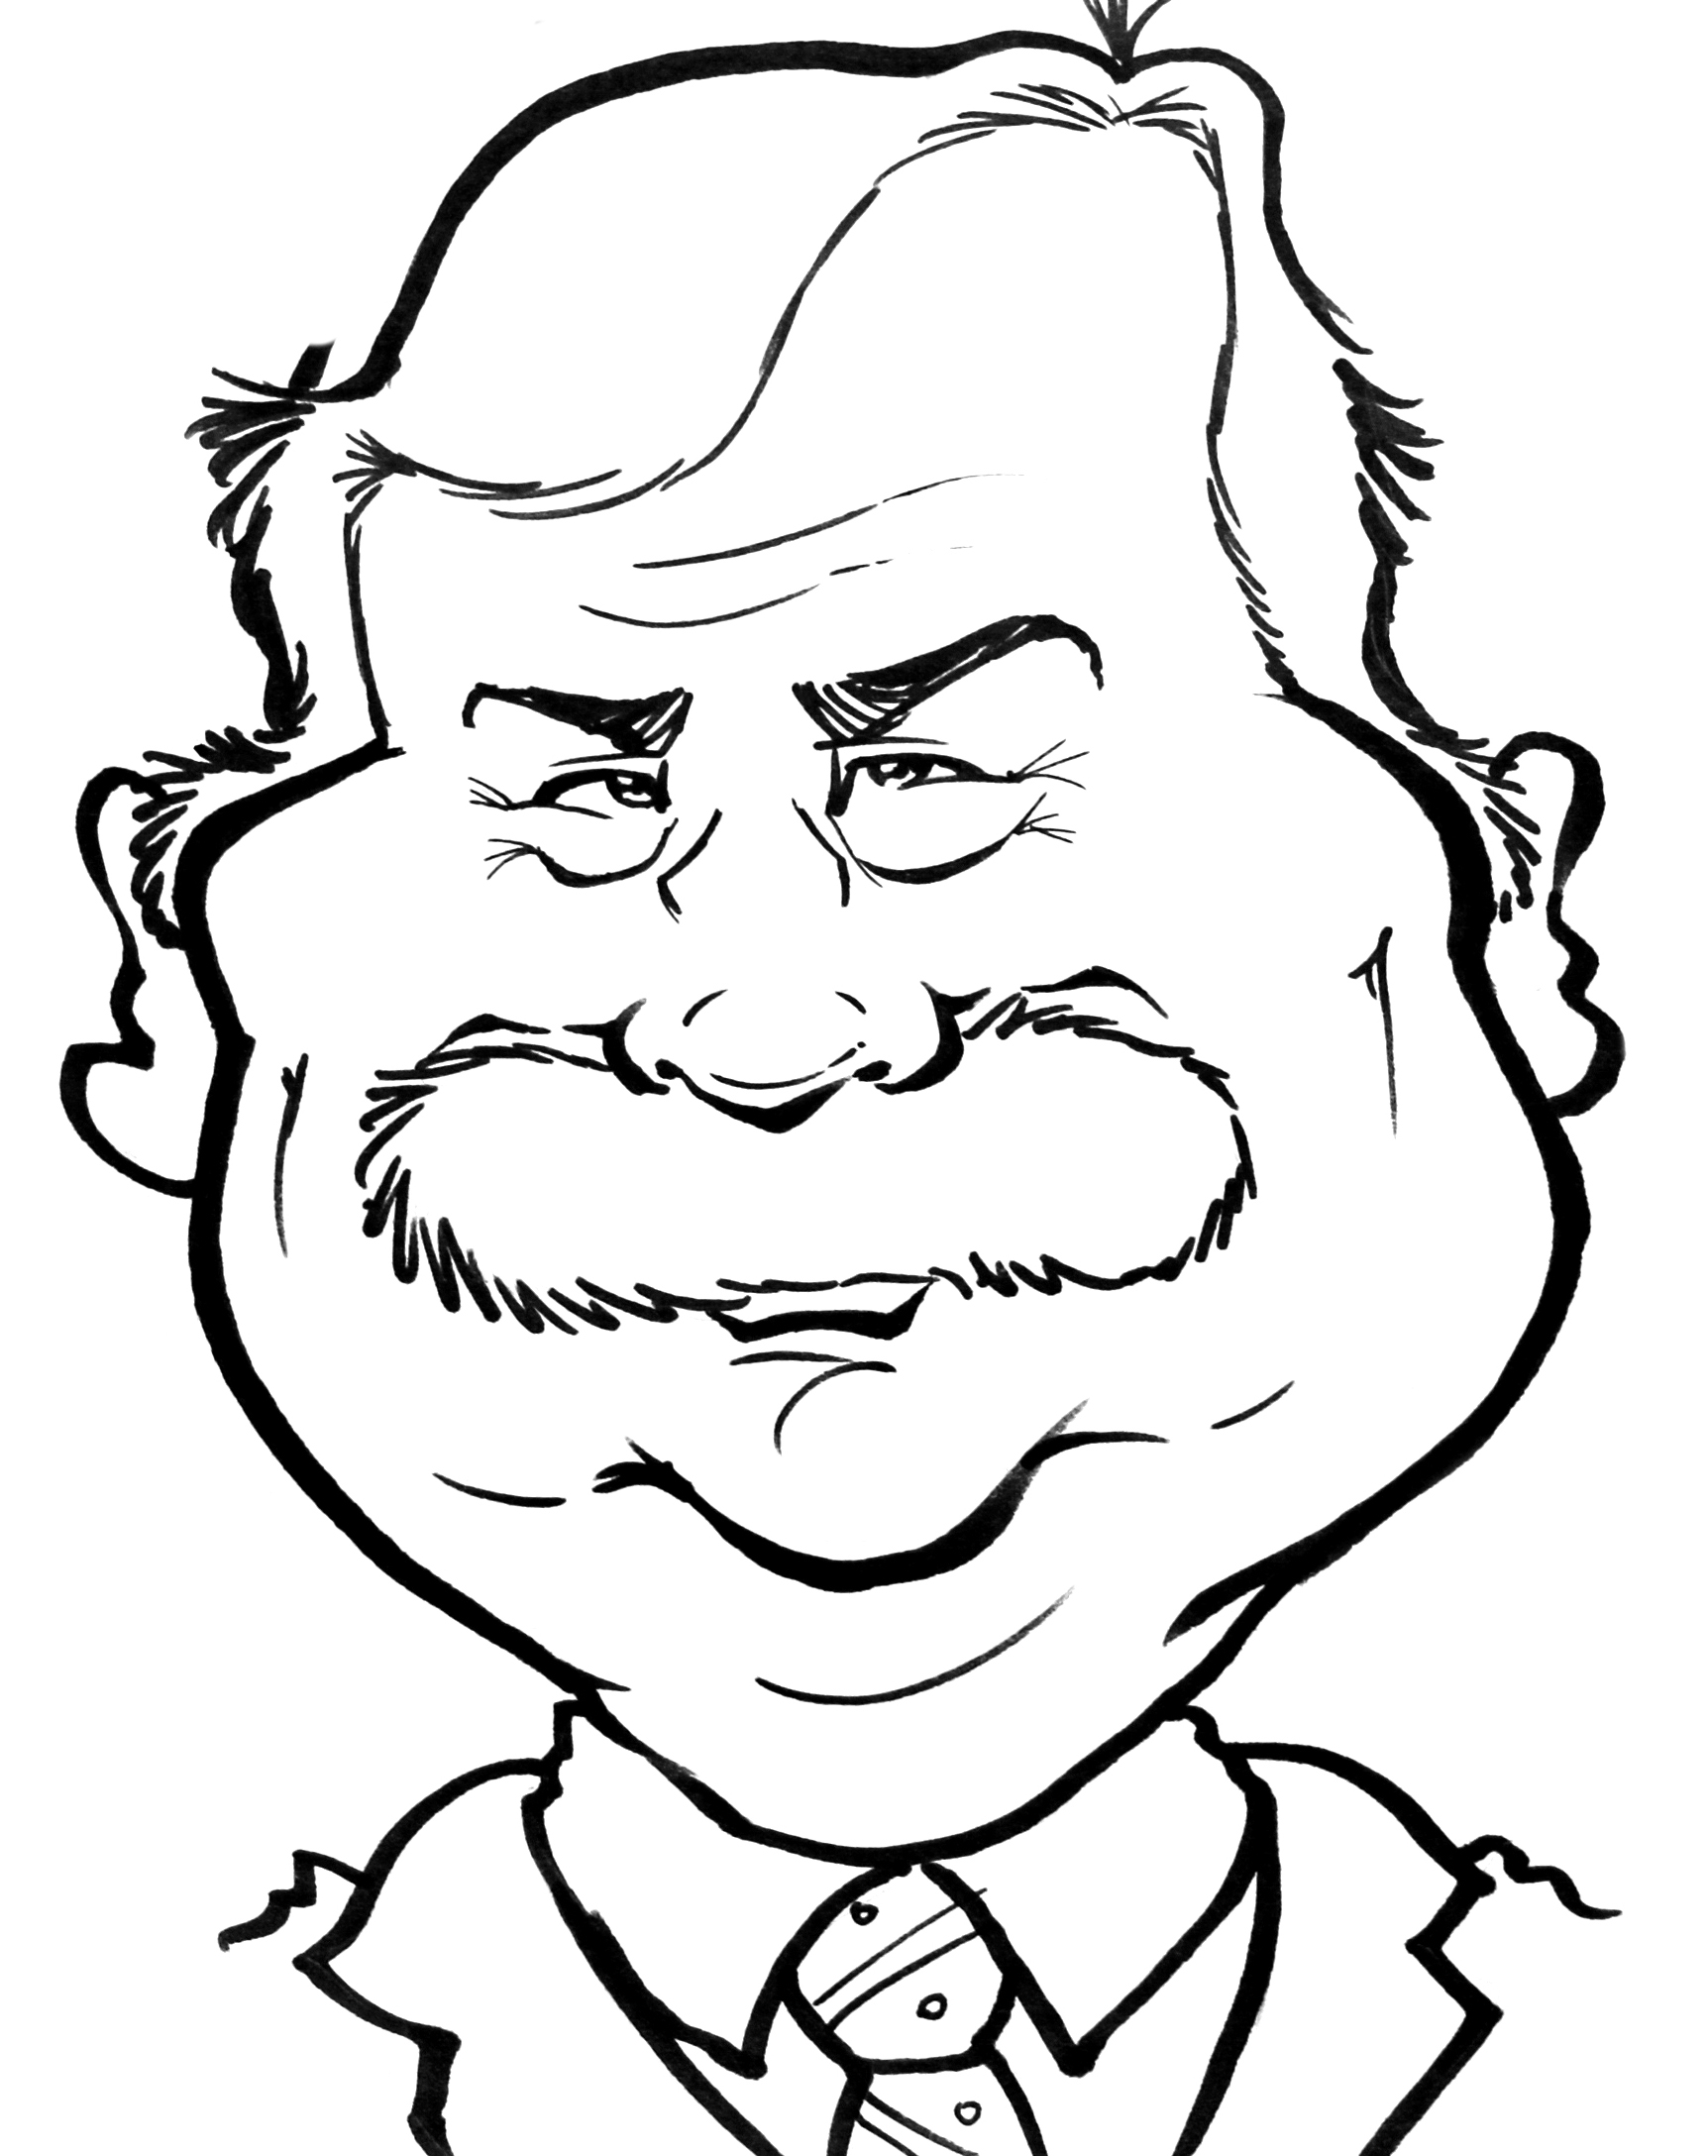 Traditional Hand-Drawn Caricature Sample 16